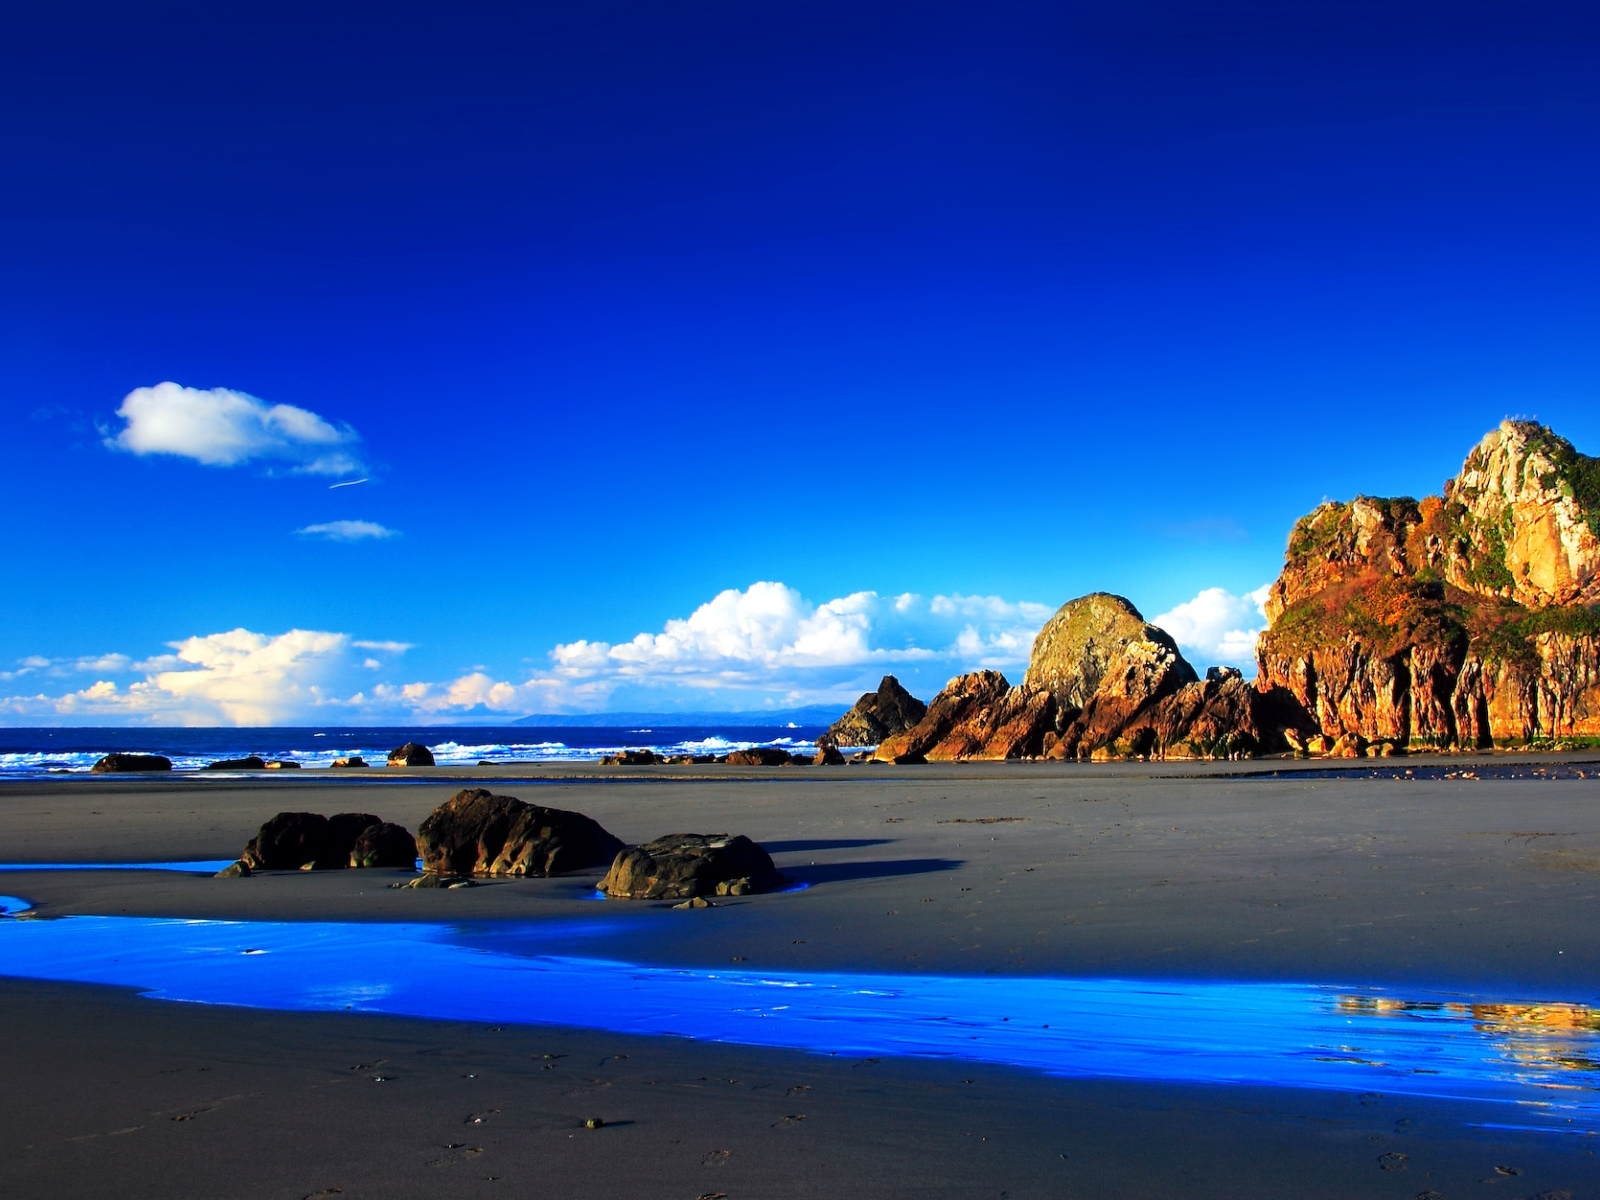 android landscape, sky, blue, mountains, beach, stones